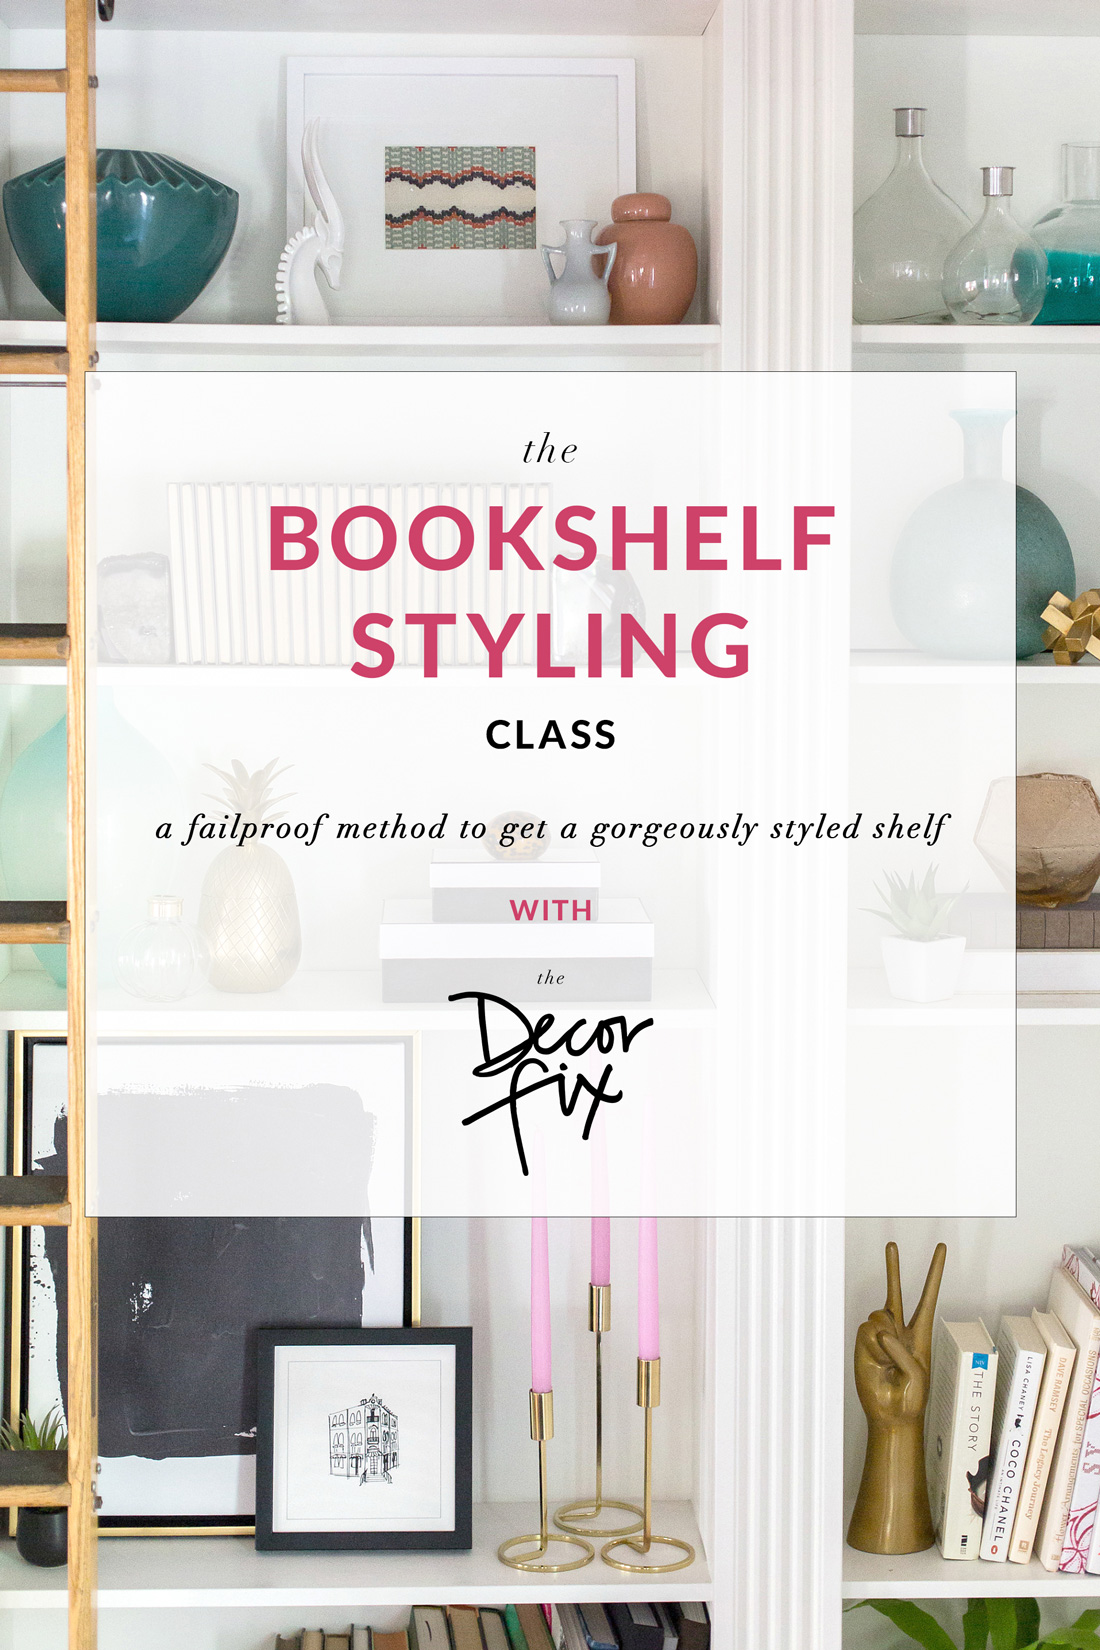 The bookshelf styling class that makes bookshelf styling foolproof #bookshelfstylingclass #decor #decortips